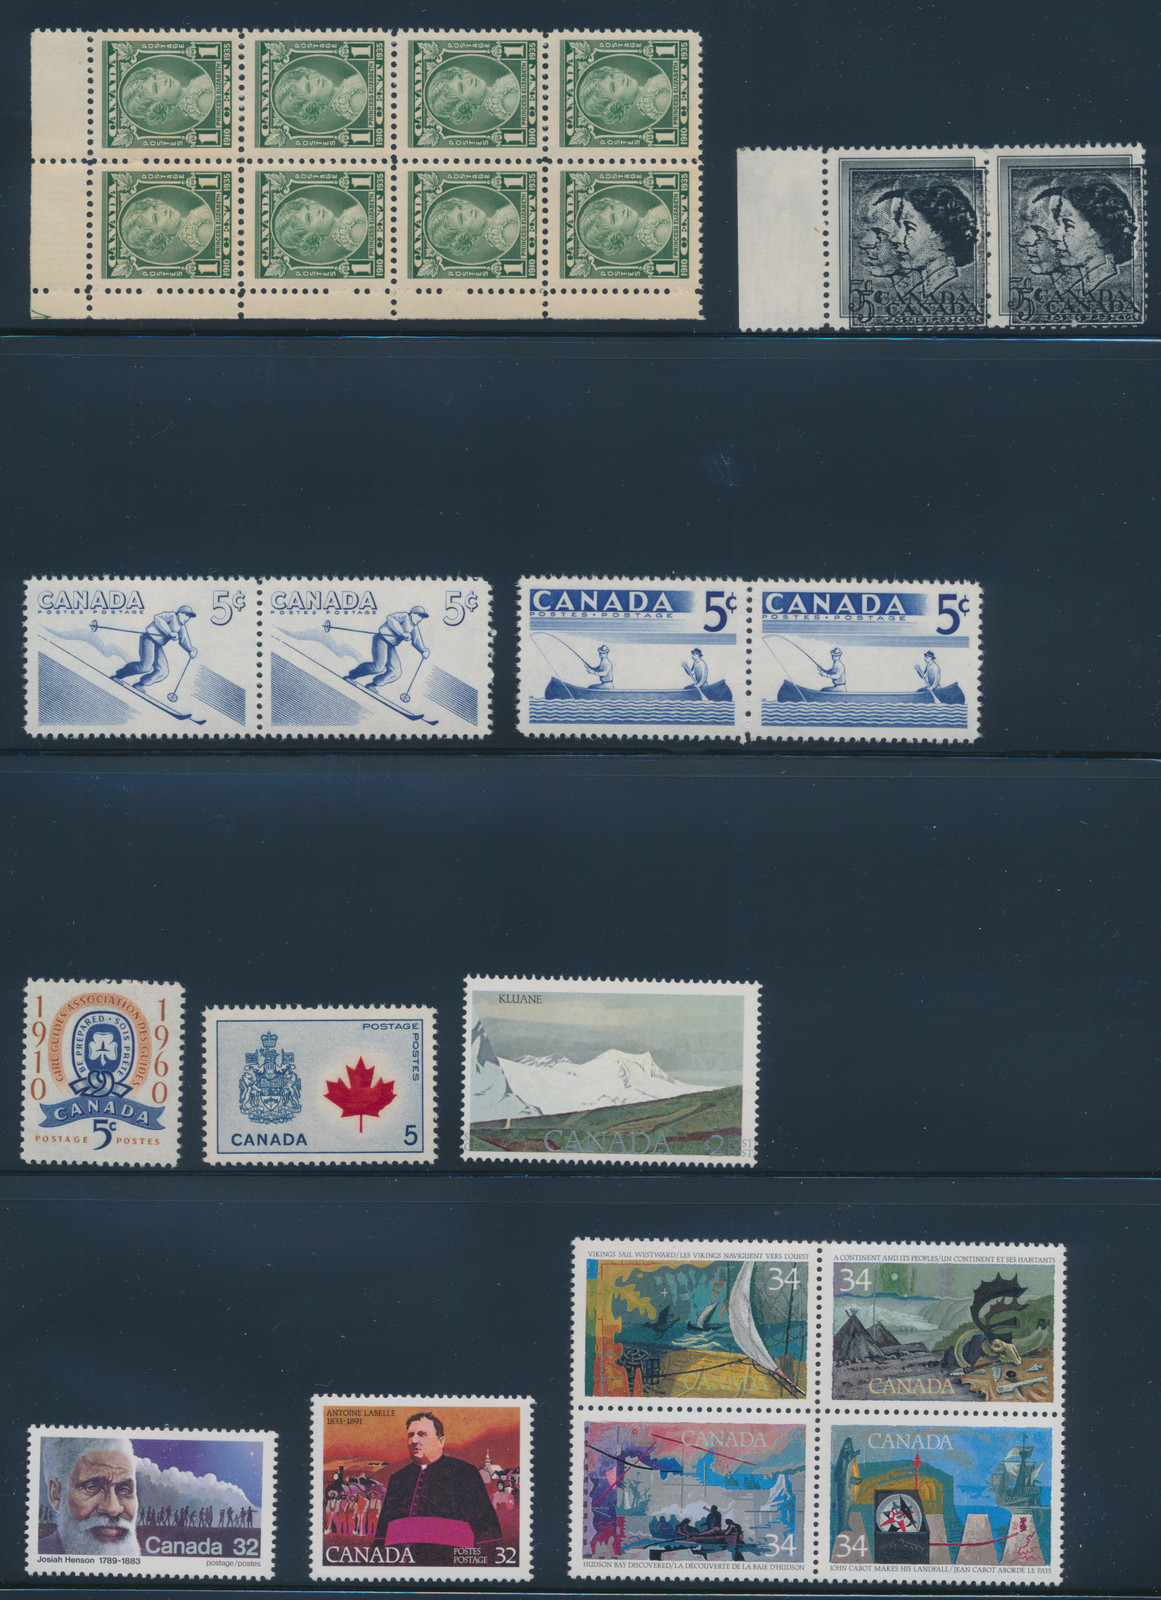 CANADA Postage Stamps, 1974 Year Set collection, 34 different Mint NH, See  scans